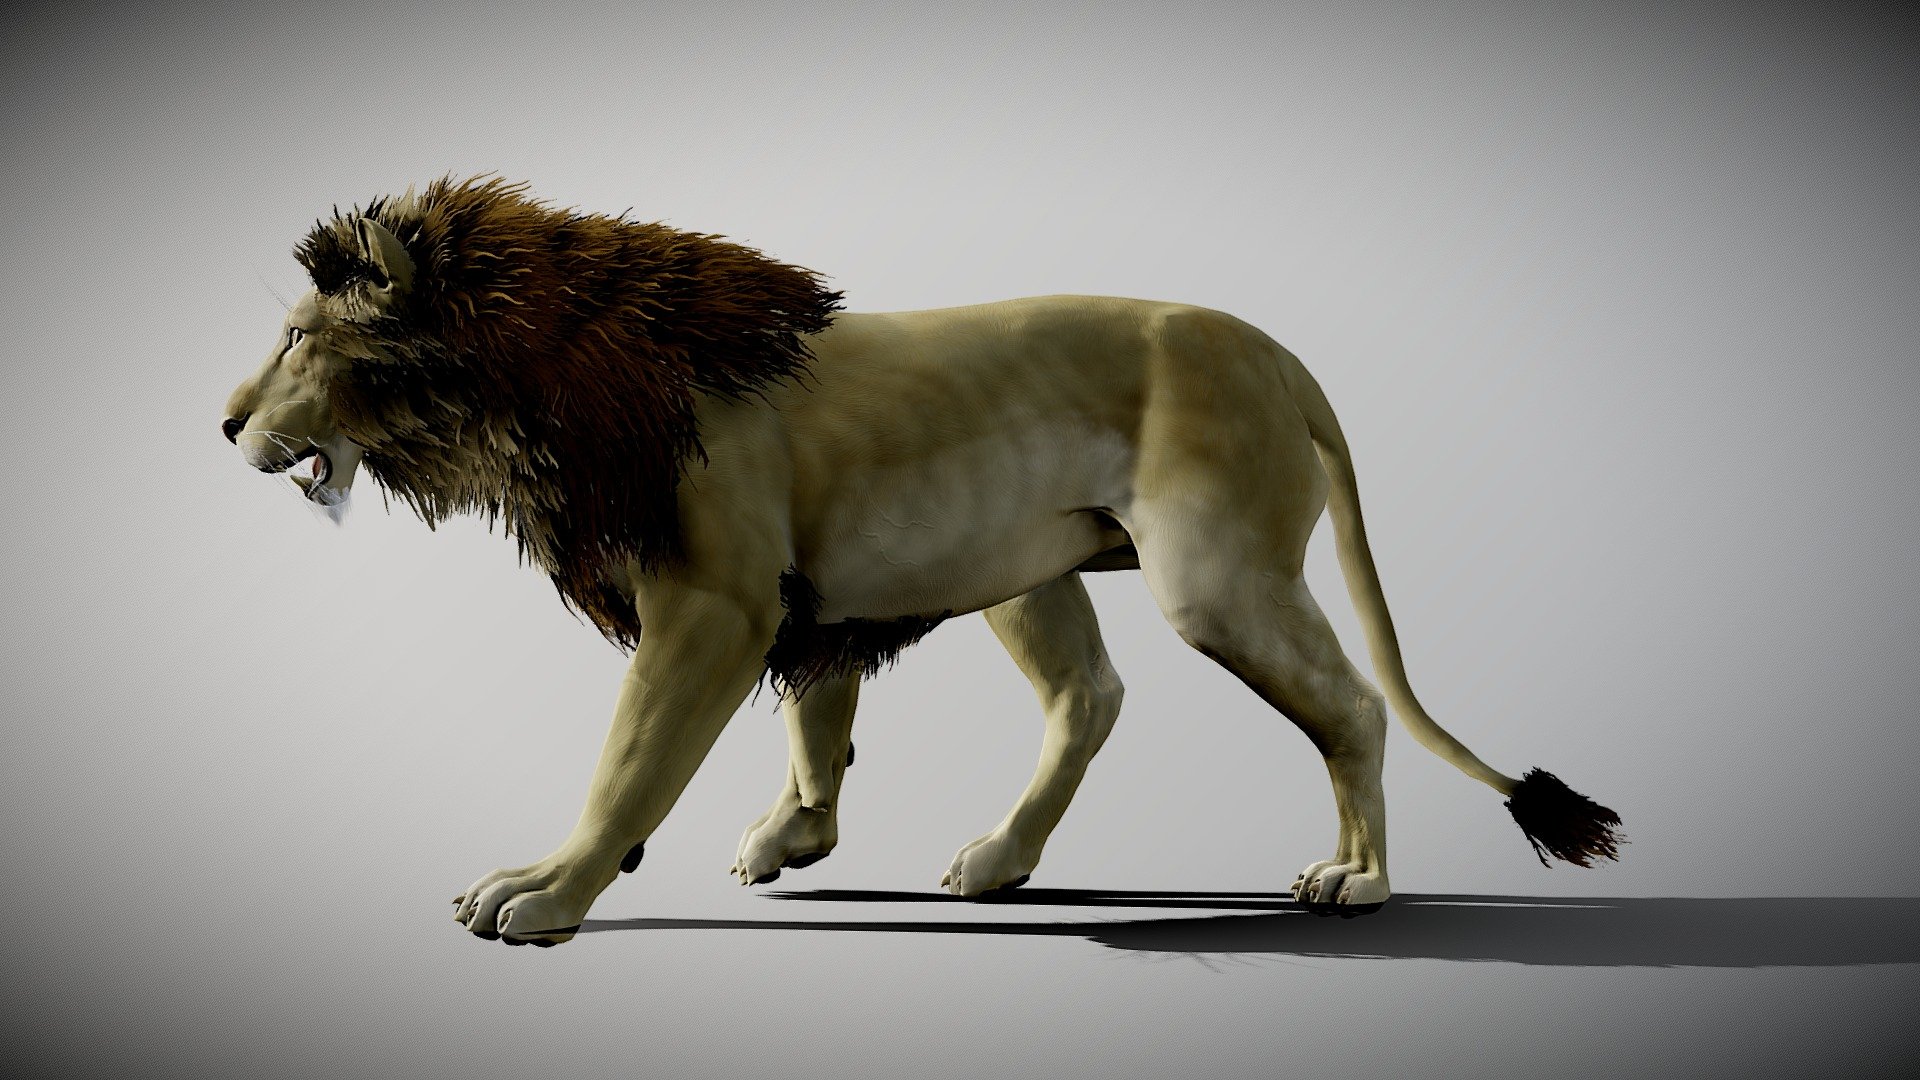 Lion rigged and animated:

This lion is sculpted in Zbrush, textured in Substance Painter and photoshop, rigged and animated in Blender




walk and run animation

textures: 4096x4096

original blender file

Wiki: The lion (Panthera leo) is a large cat of the genus Panthera native to Africa and India. It has a muscular, broad-chested body, short, rounded head, round ears, and a hairy tuft at the end of its tail. It is sexually dimorphic; adult male lions are larger than females and have a prominent mane. It is a social species, forming groups called prides. A lion's pride consists of a few adult males, related females, and cubs. Groups of female lions usually hunt together, preying mostly on large ungulates. The lion is an apex and keystone predator; although some lions scavenge when opportunities occur and have been known to hunt humans, the species typically does not actively seek out and prey on humans 3d model